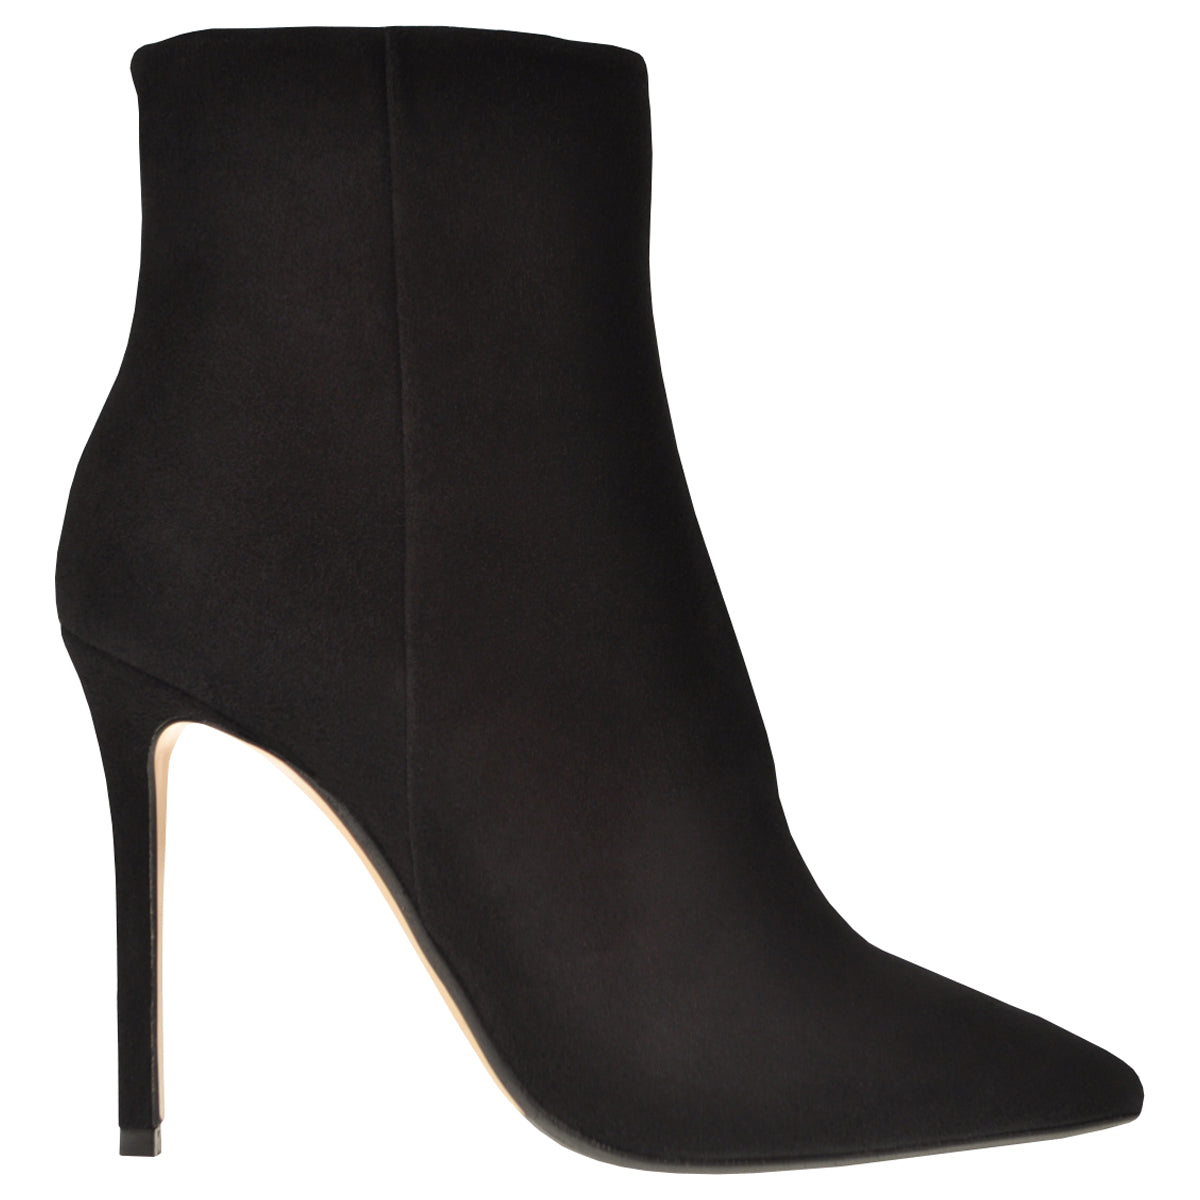 Black suede ankle boots with stiletto heels. 